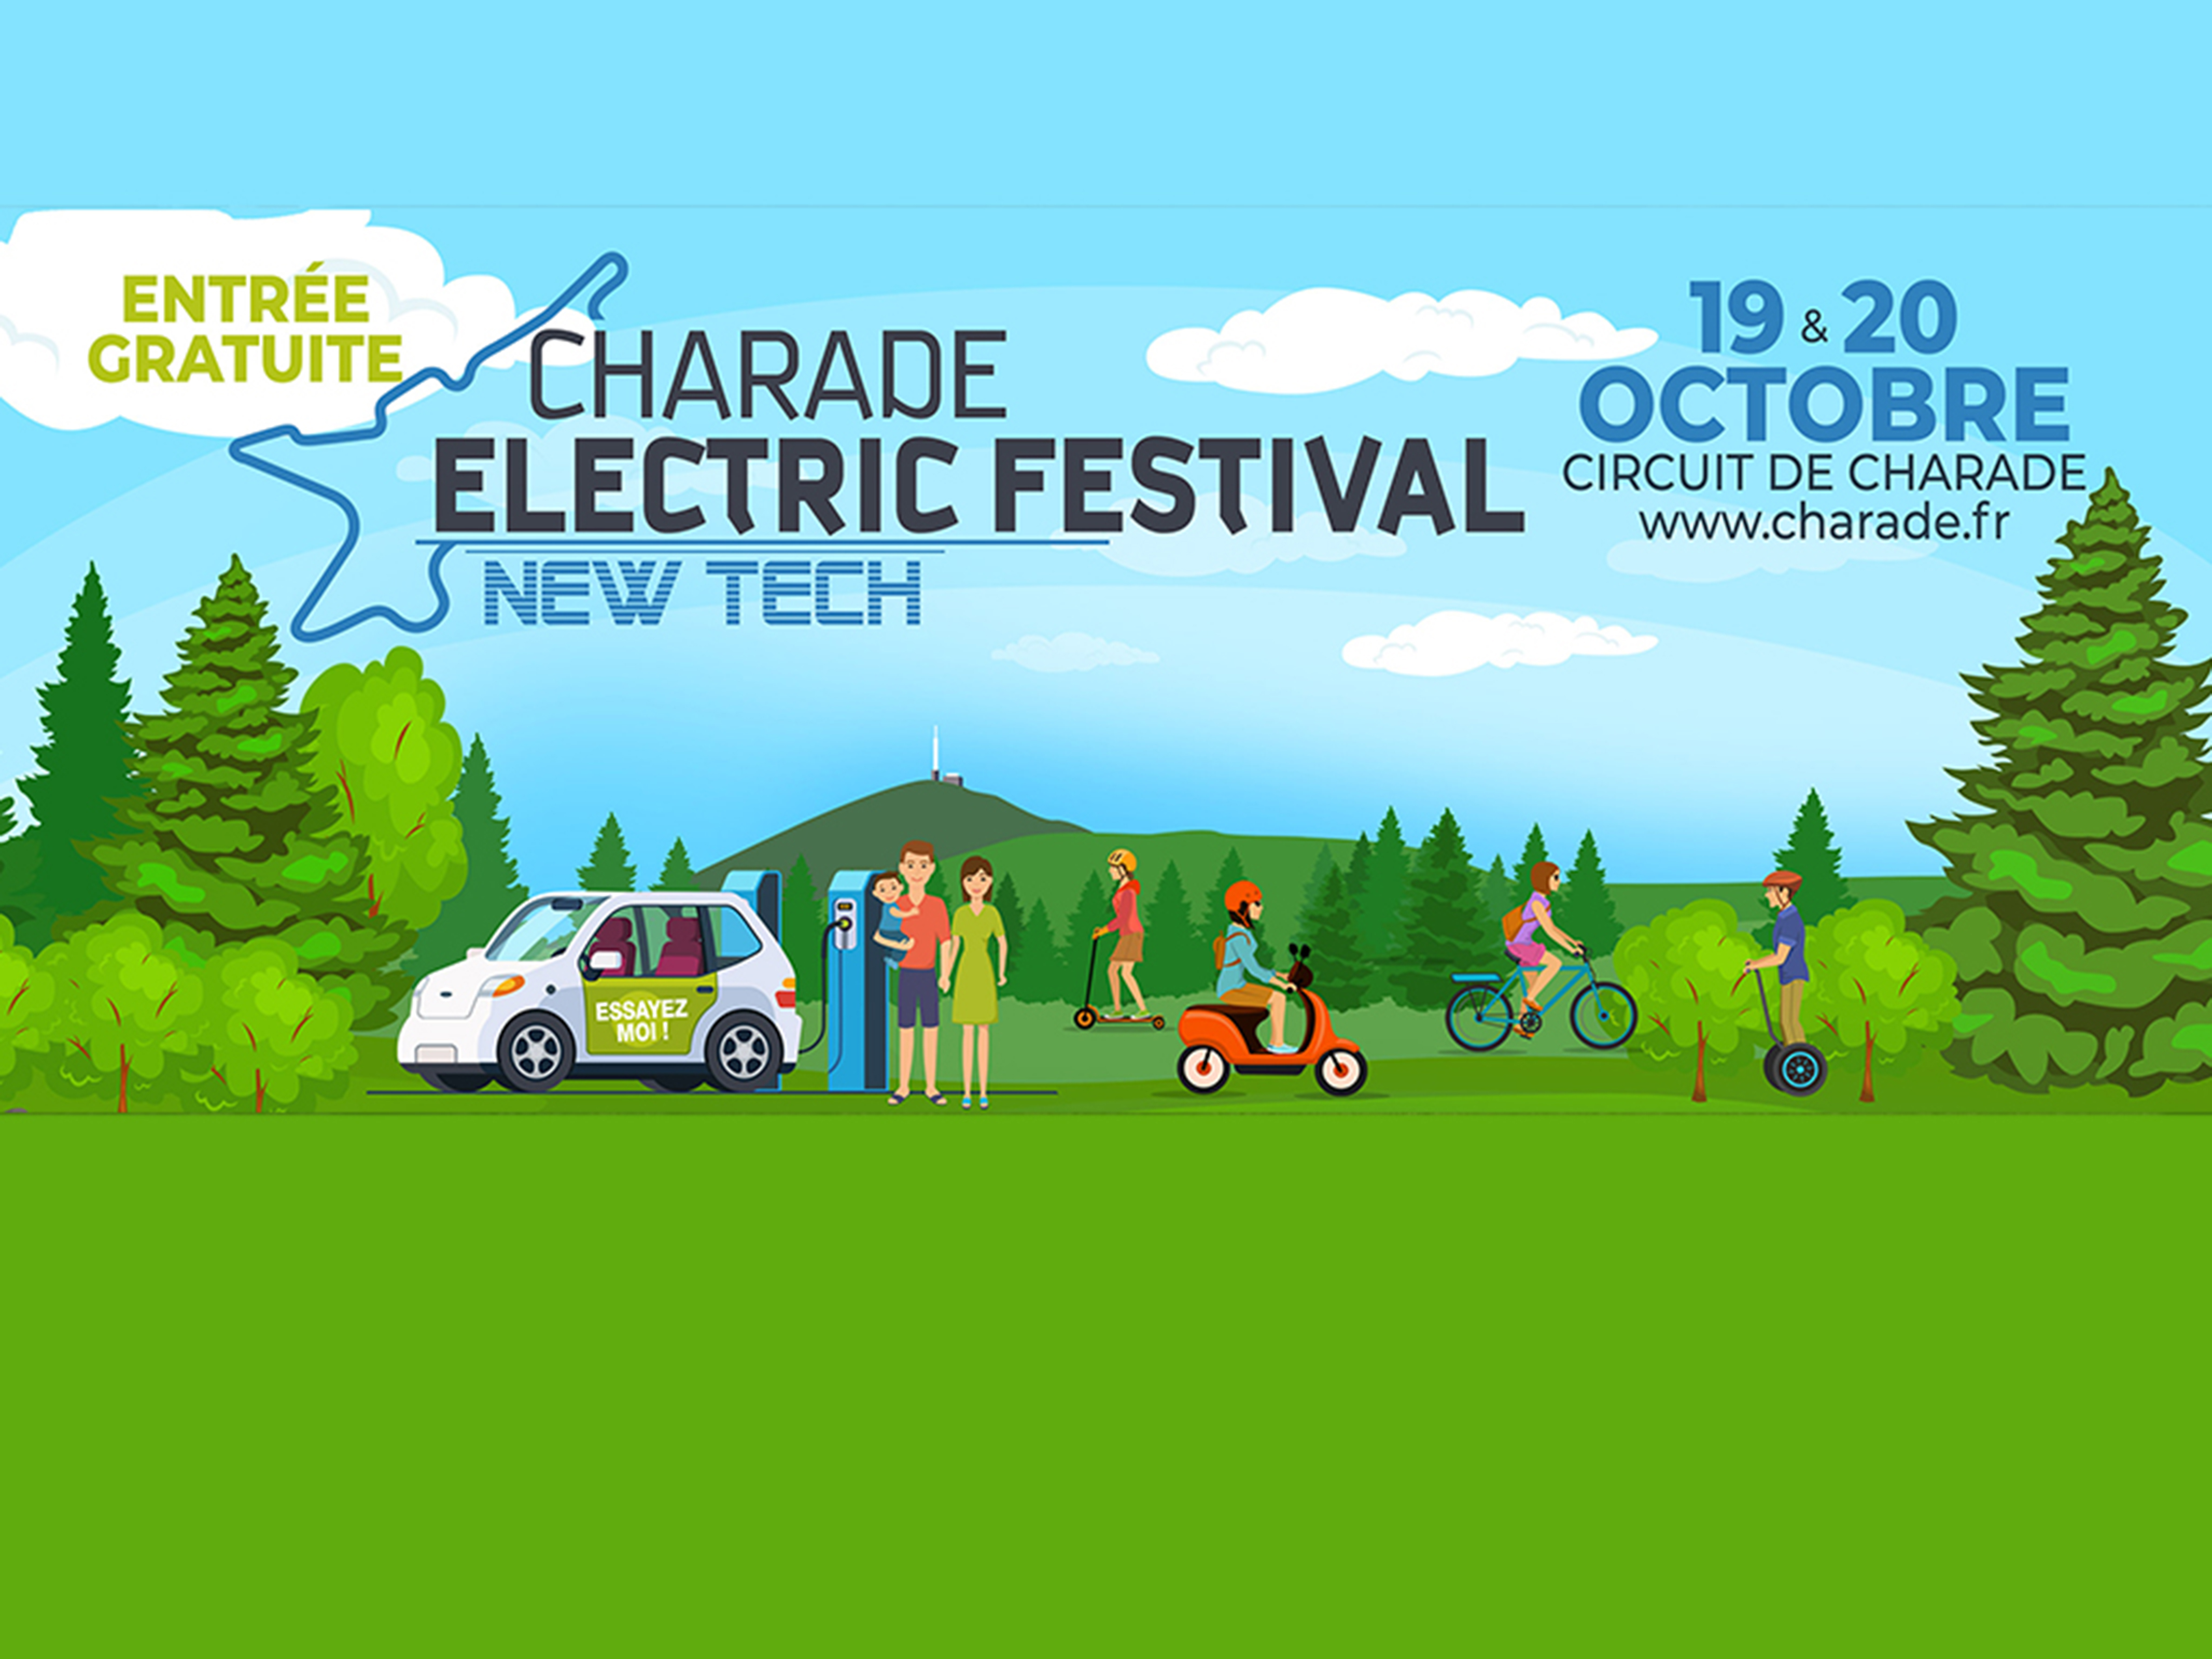 Charade electric festival